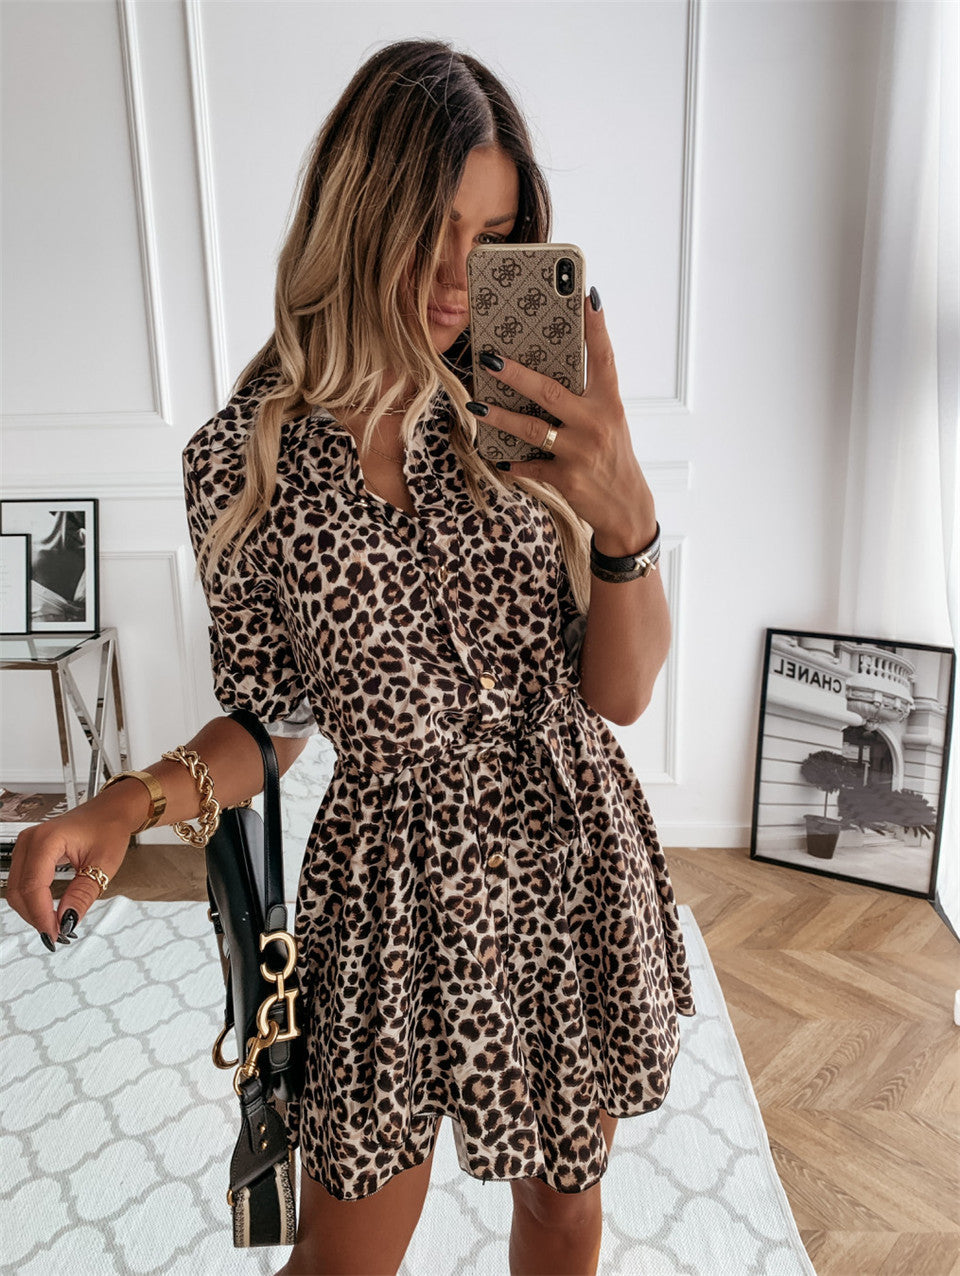 New elegant and sexy dress, casual wear, printed shirt dress